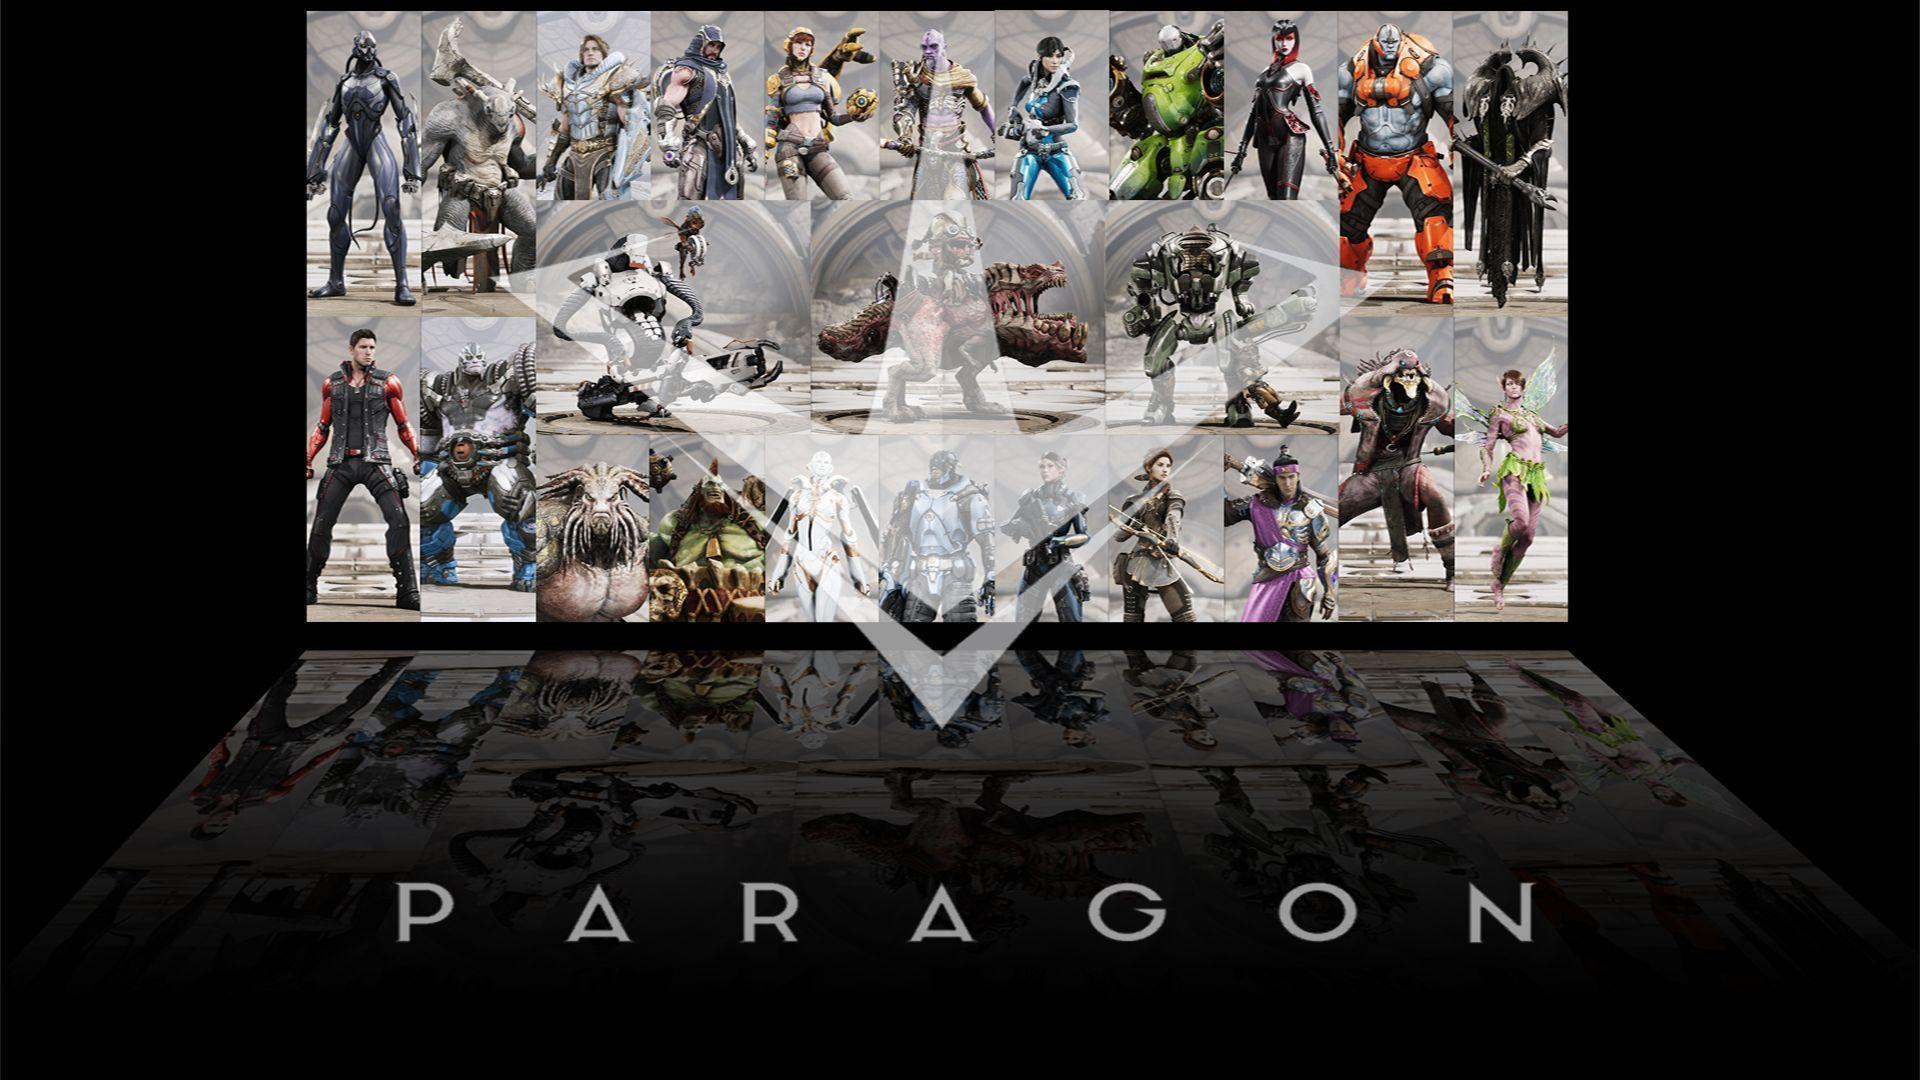 My two Paragon wallpaper in 1920x1080 and 1440x1080 Need #iPhone